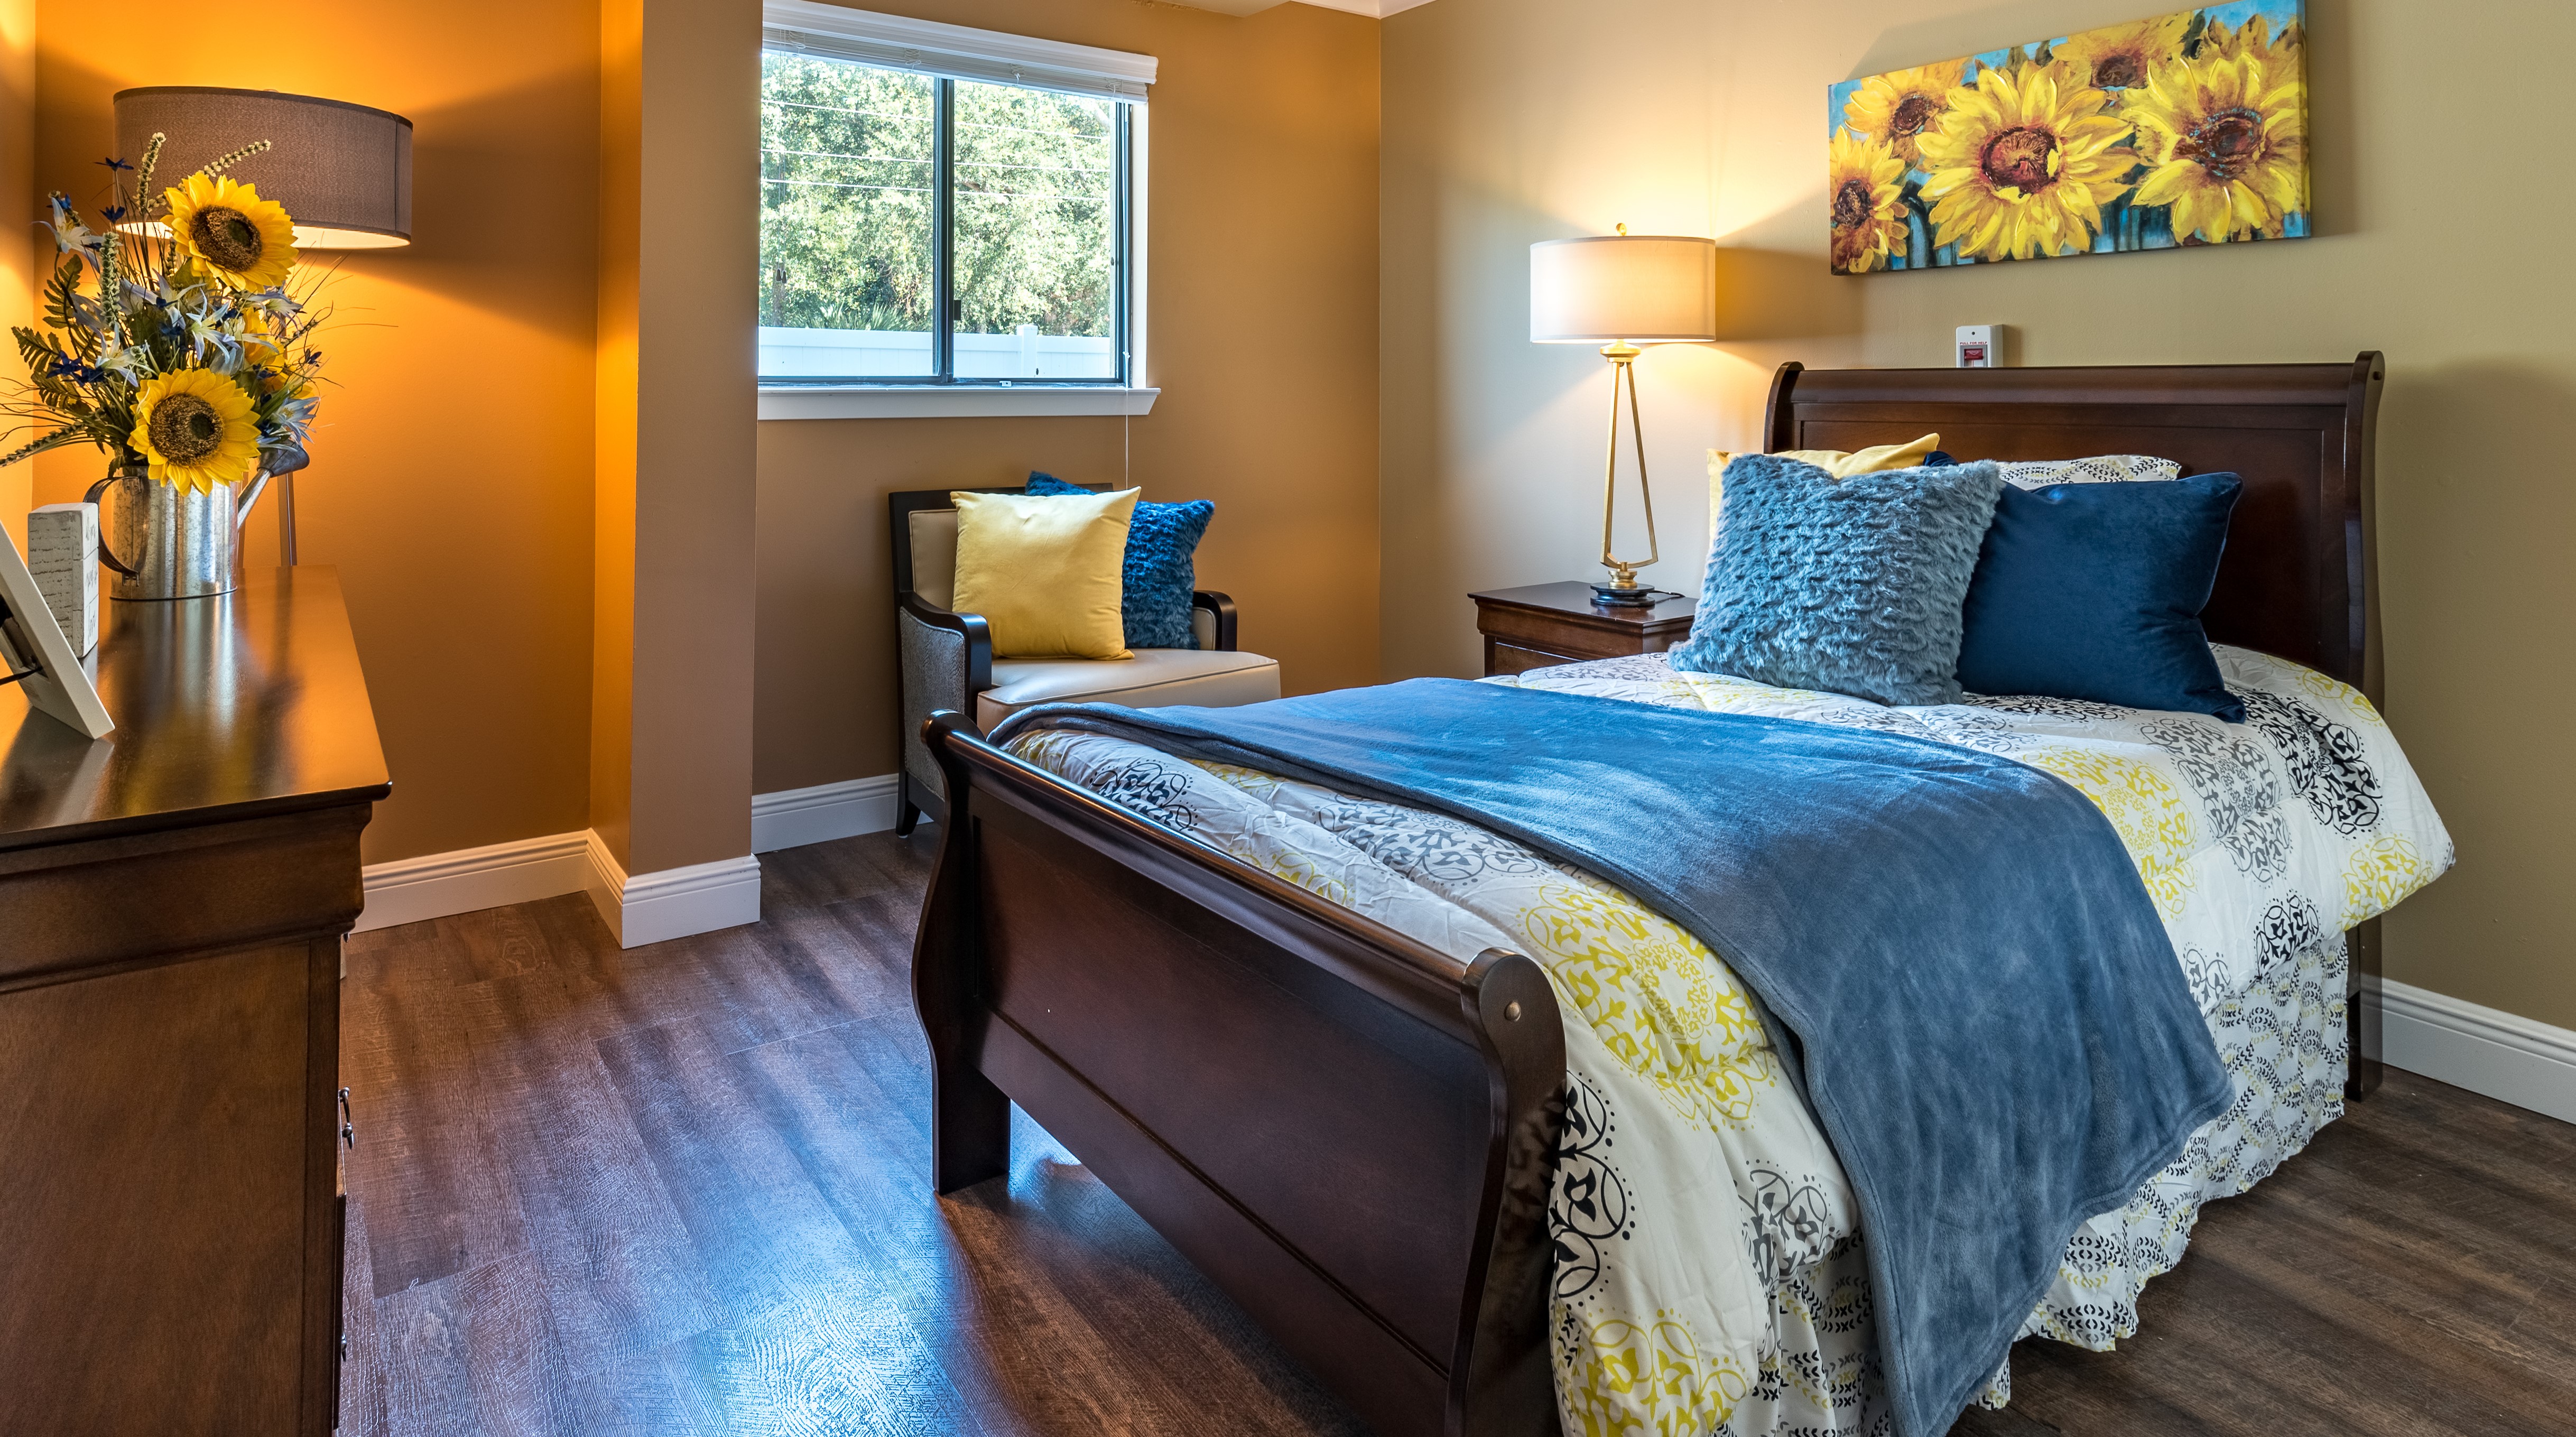 A luxurious bedroom at The Meridian at Lantana